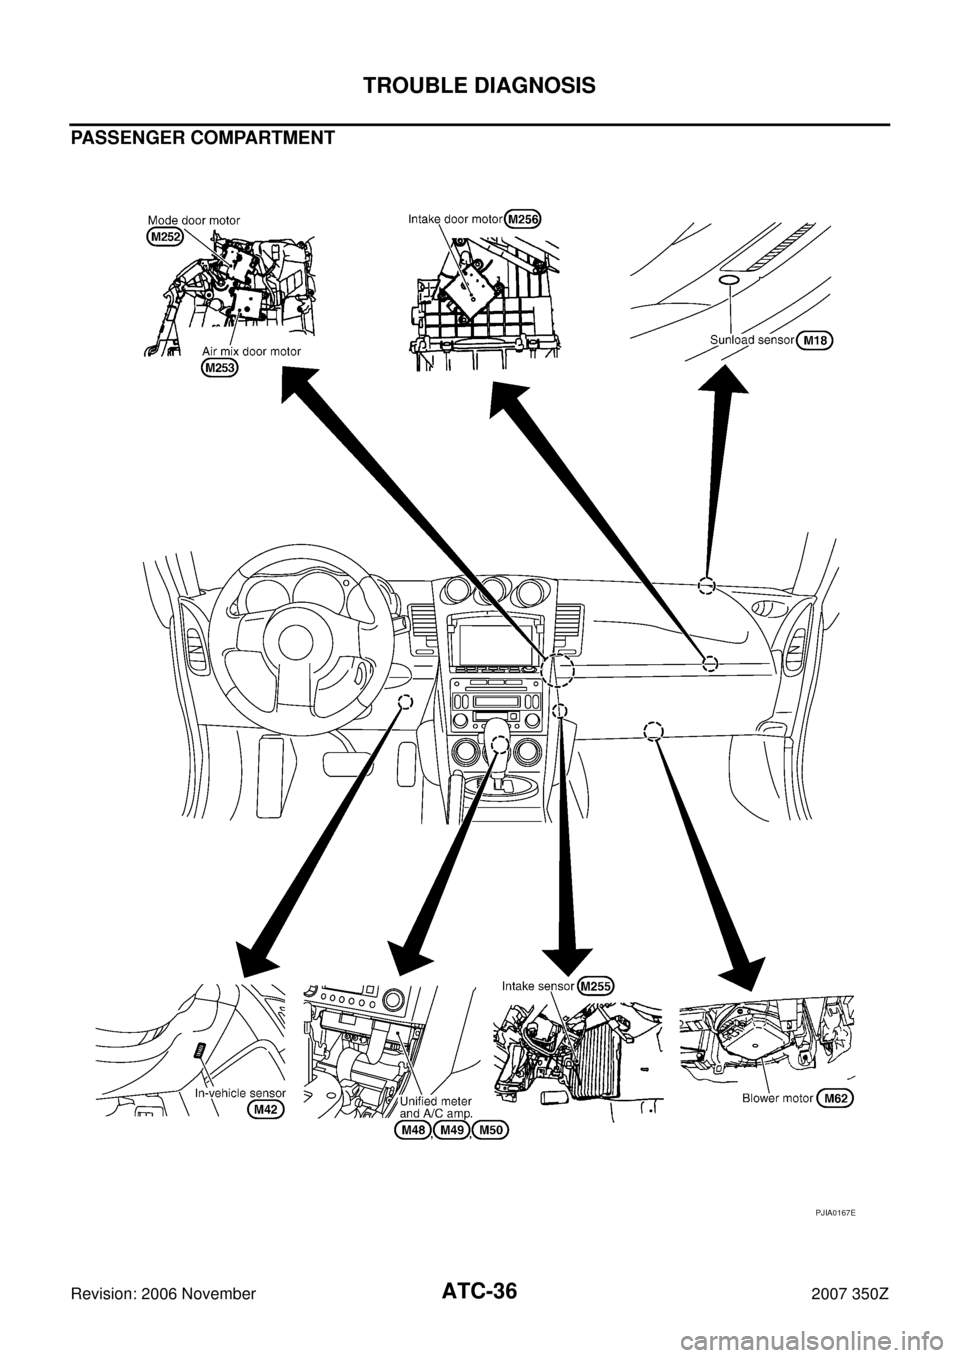 NISSAN 350Z 2007 Z33 Automatic Air Conditioner Owners Guide ATC-36
TROUBLE DIAGNOSIS
Revision: 2006 November2007 350Z
PASSENGER COMPARTMENT
PJIA0167E 